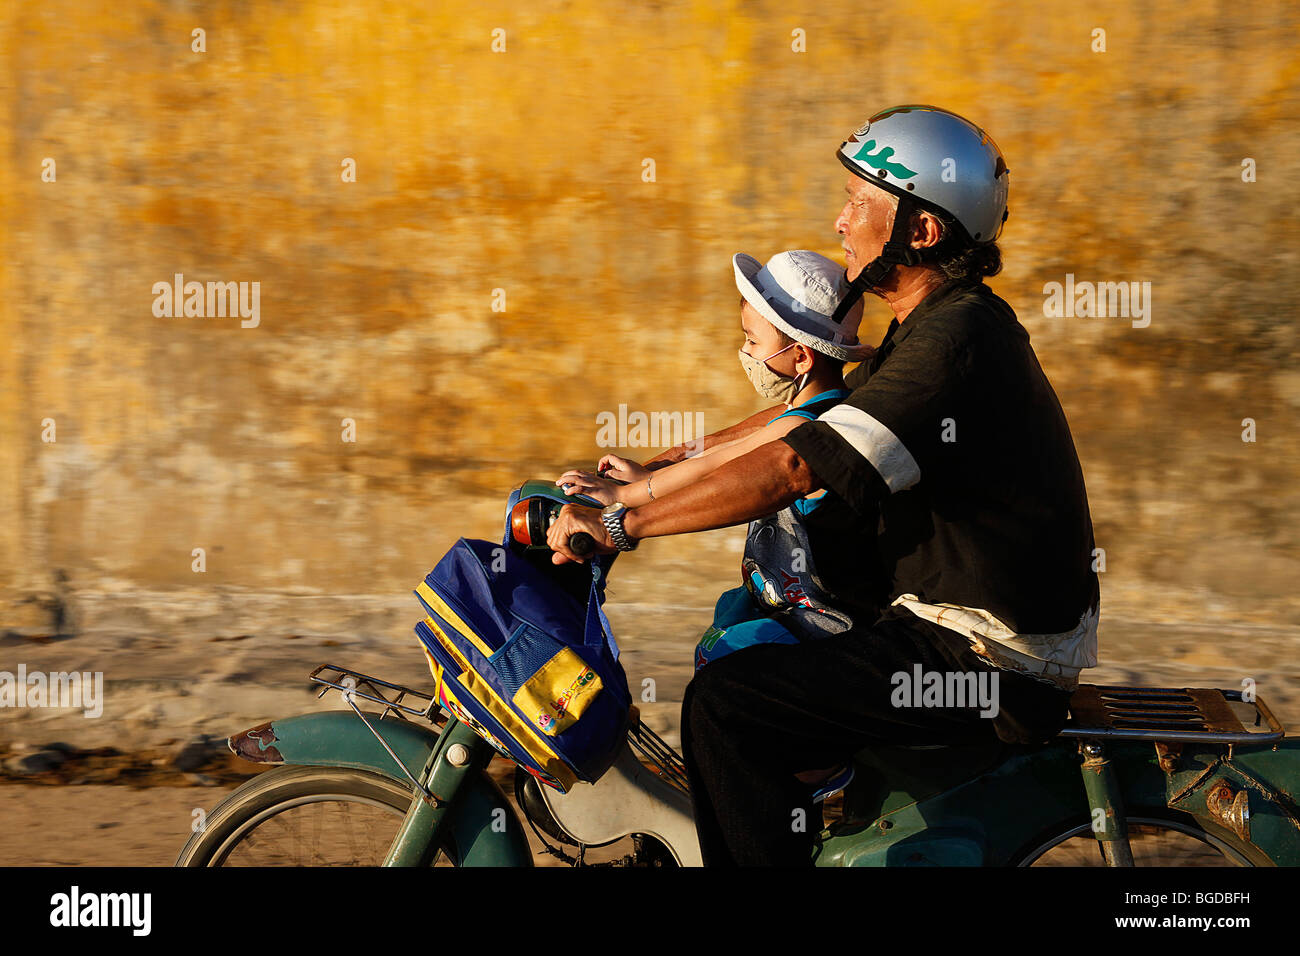 Vietnamese father with his son on his motor scooter with a backpack, Hoi An, Vietnam, Southeast Asia Stock Photo